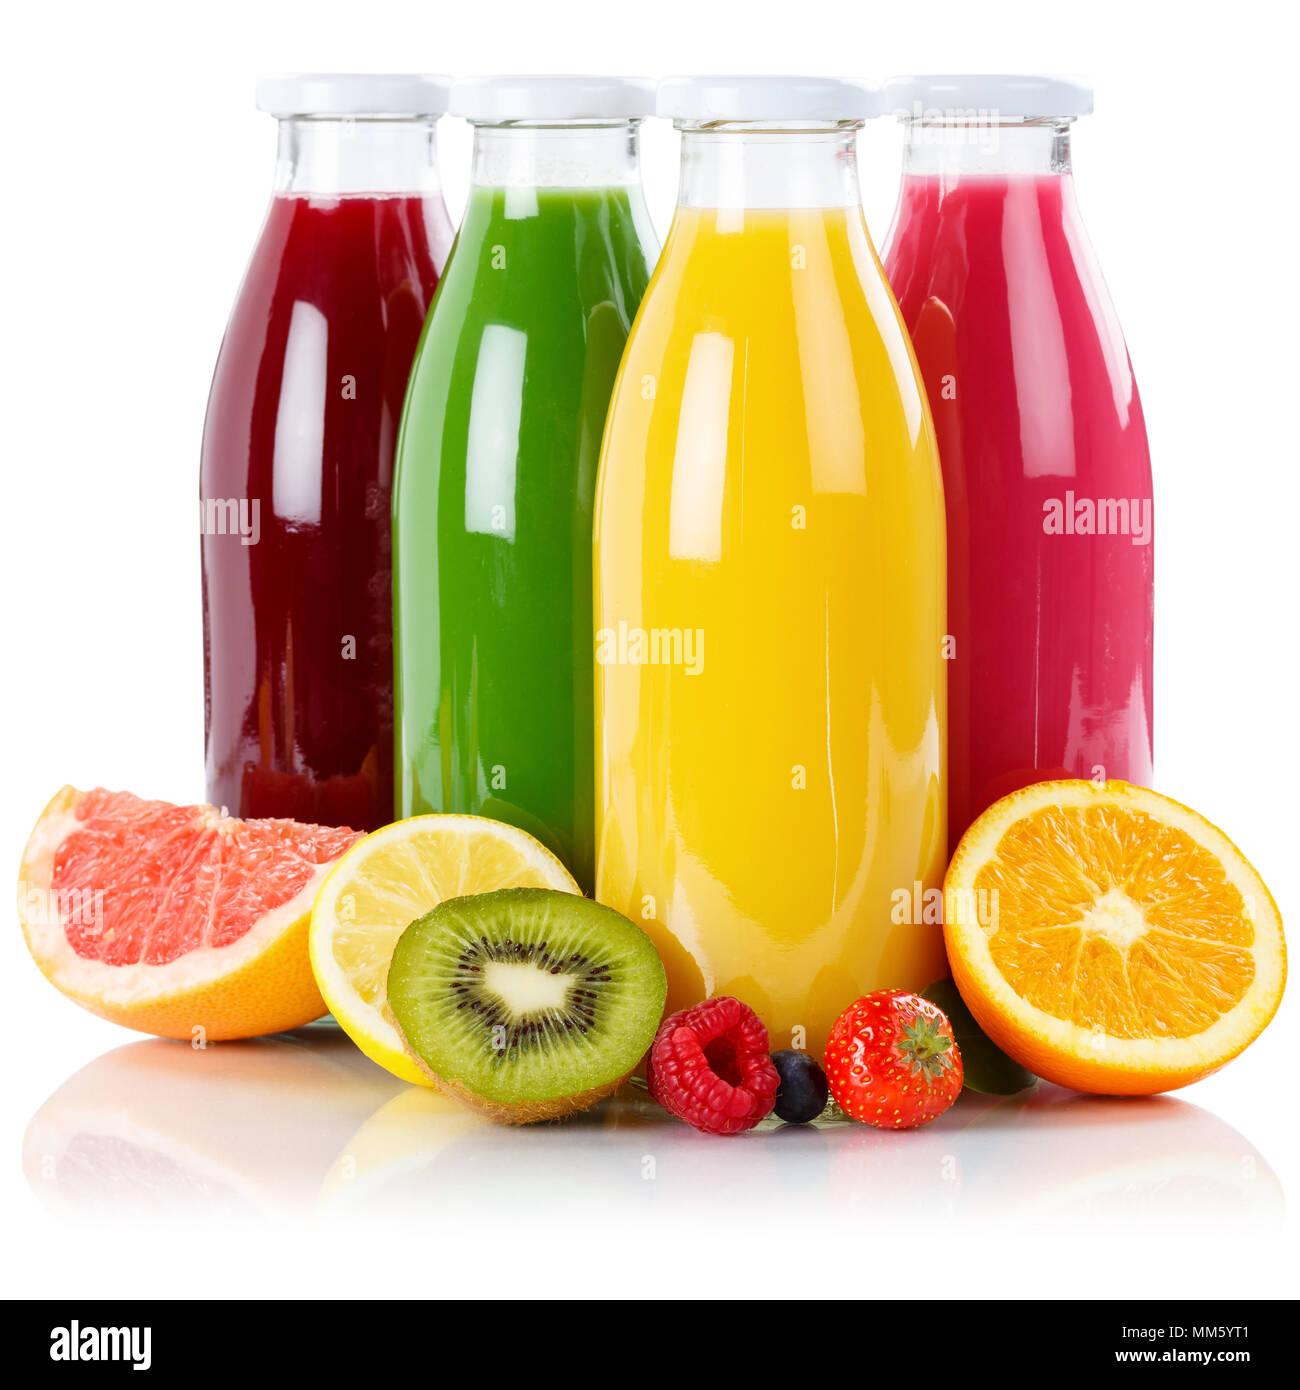 https://c8.alamy.com/comp/MM5YT1/juice-smoothie-smoothies-in-bottle-square-fruit-fruits-isolated-on-a-white-background-MM5YT1.jpg